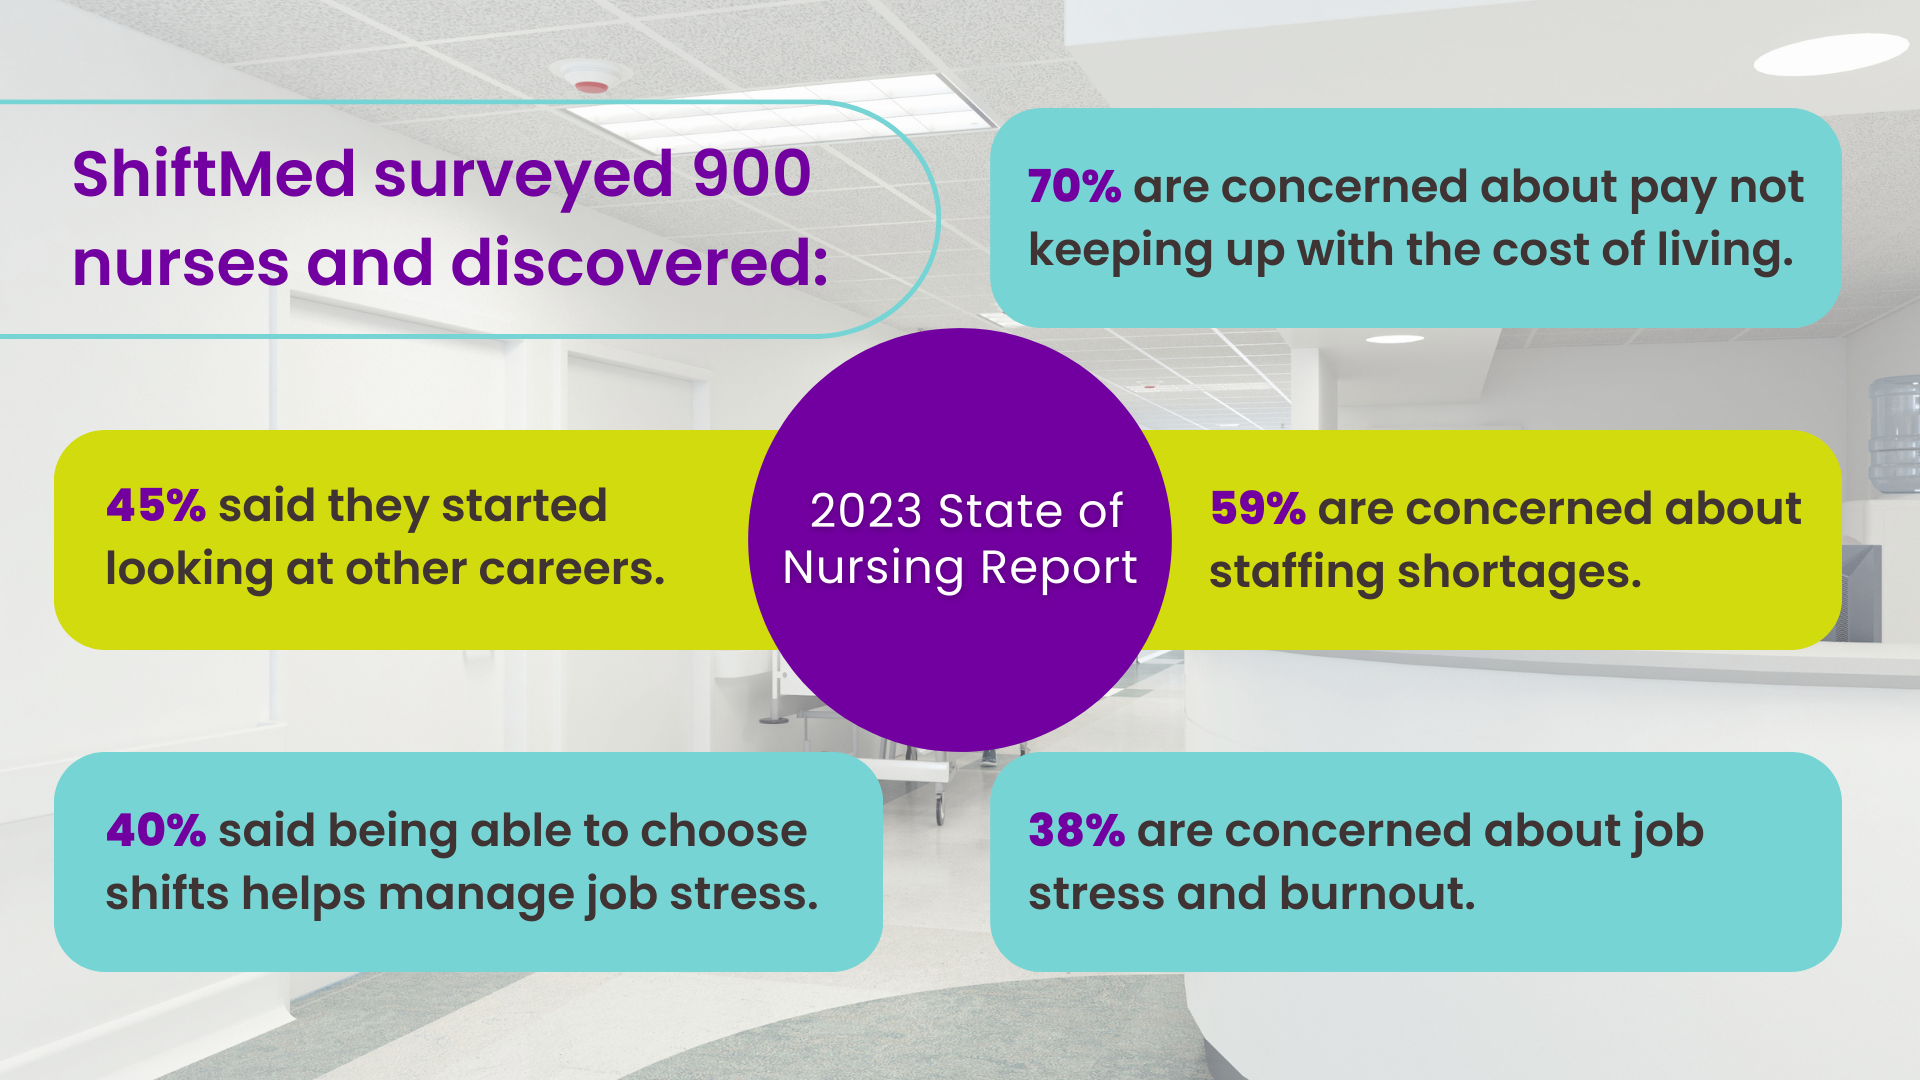 An infographic that lists the results of ShiftMed's 2023 State of Nursing Report that surveyed 900 nurses.